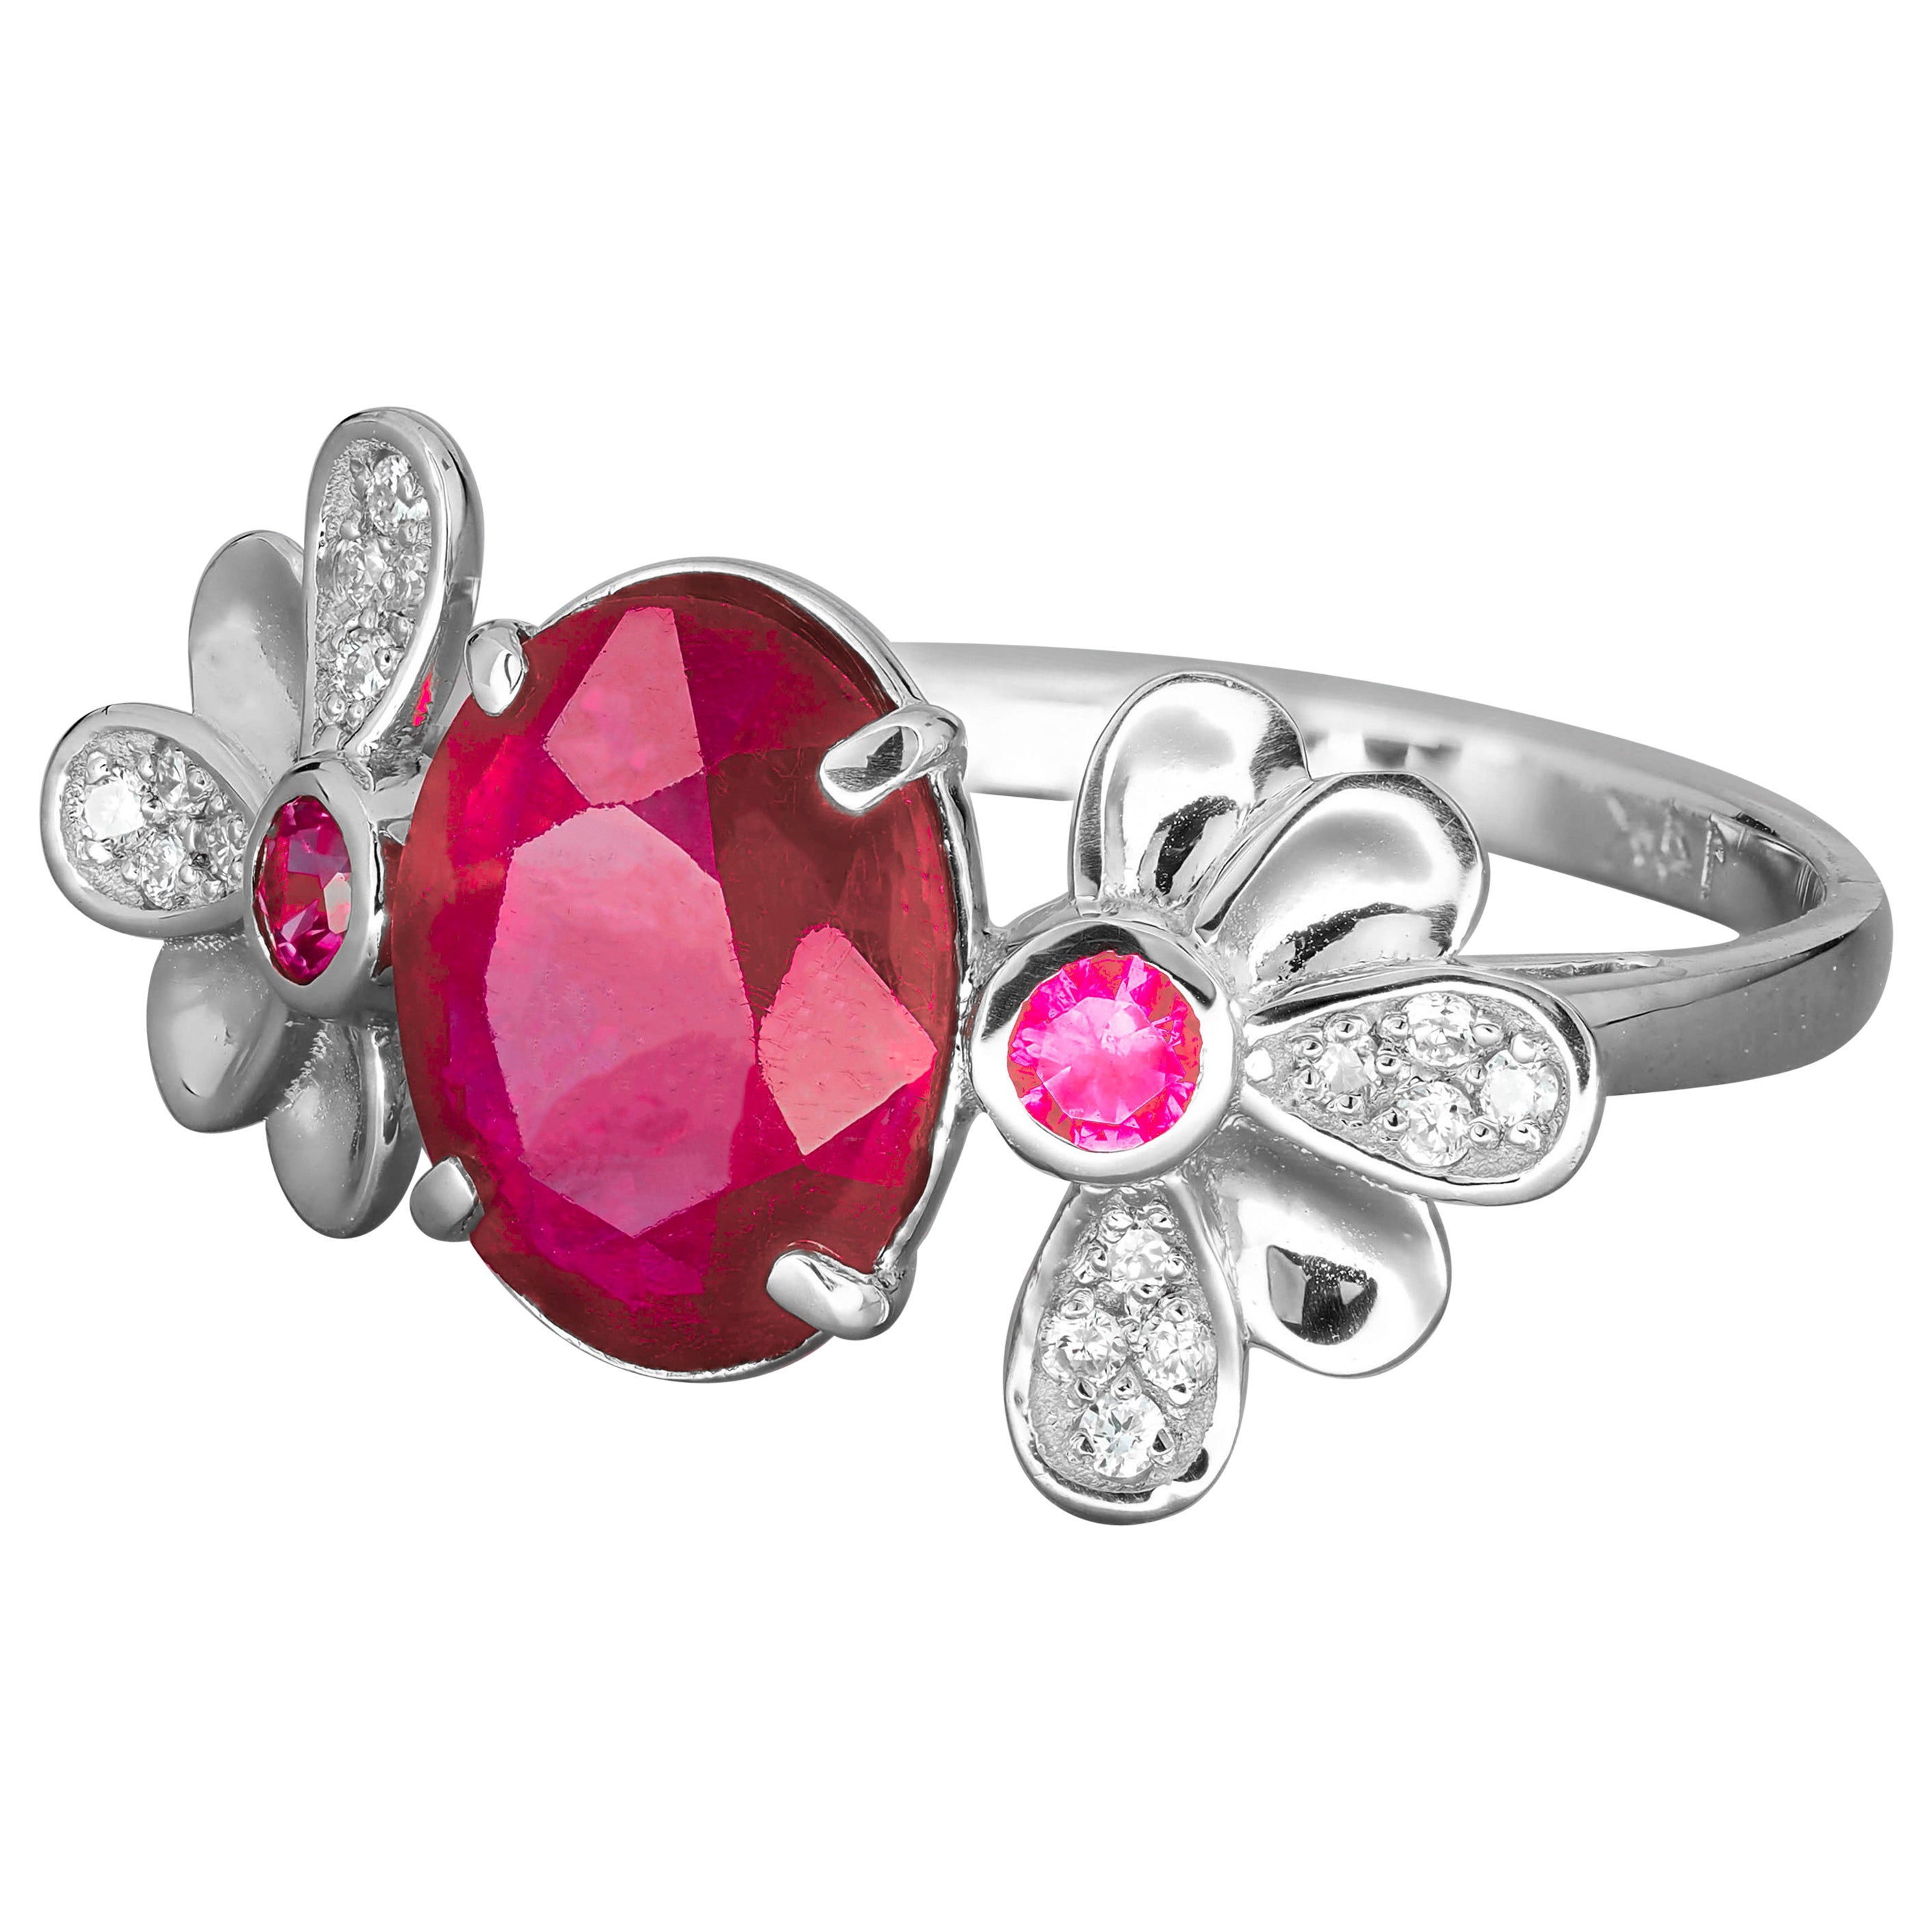 Genuine Ruby Ring, Ruby and Diamonds Ring